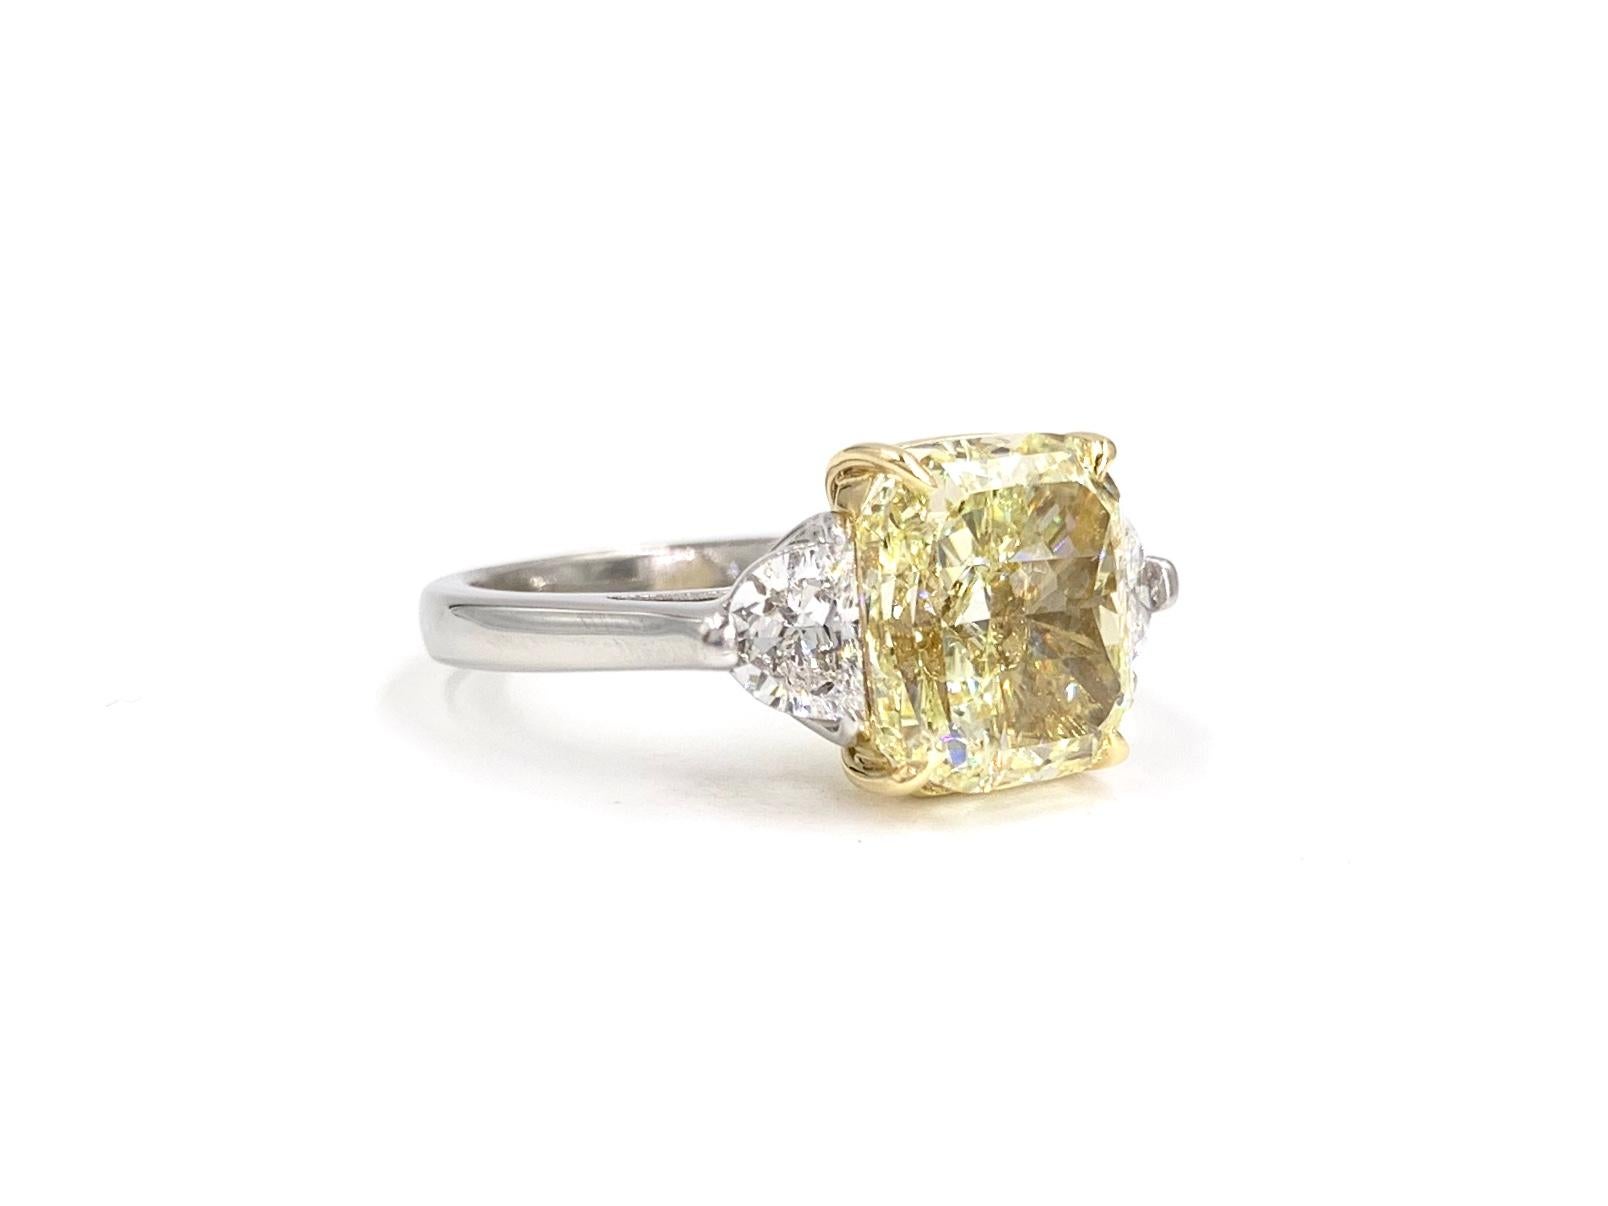 A simply stunning platinum and 18 karat yellow gold three stone ring featuring a vibrant 5.55 carat GIA certified fancy light yellow round-cornered rectangular modified brilliant diamond, VS2 clarity, No fluorescence. Diamond is perfectly flanked by